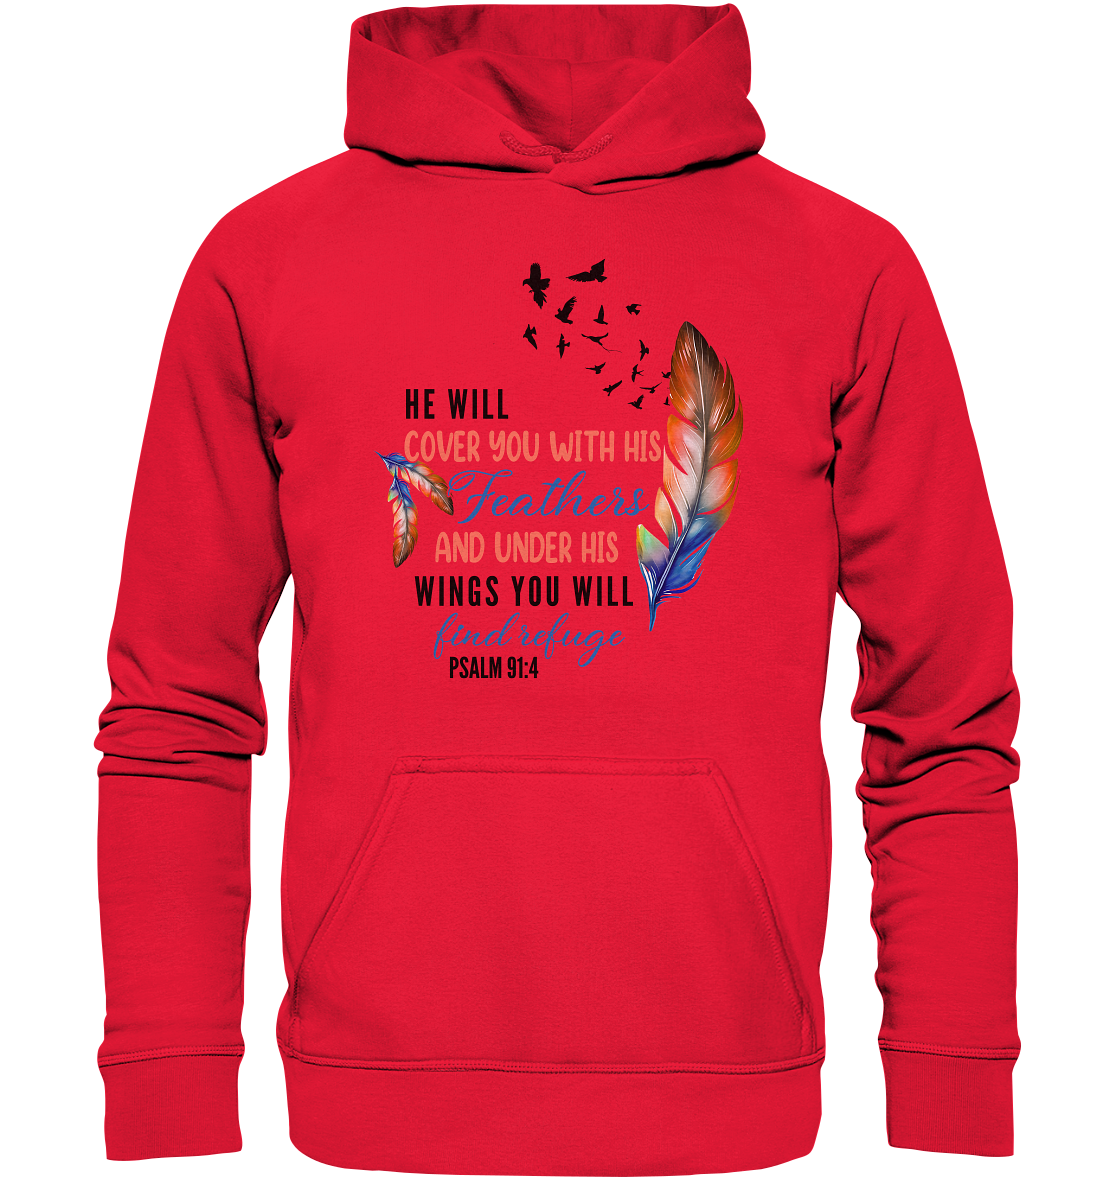 Psalm 91:4 - He will cover you with his Feathers - Kids Premium Hoodie